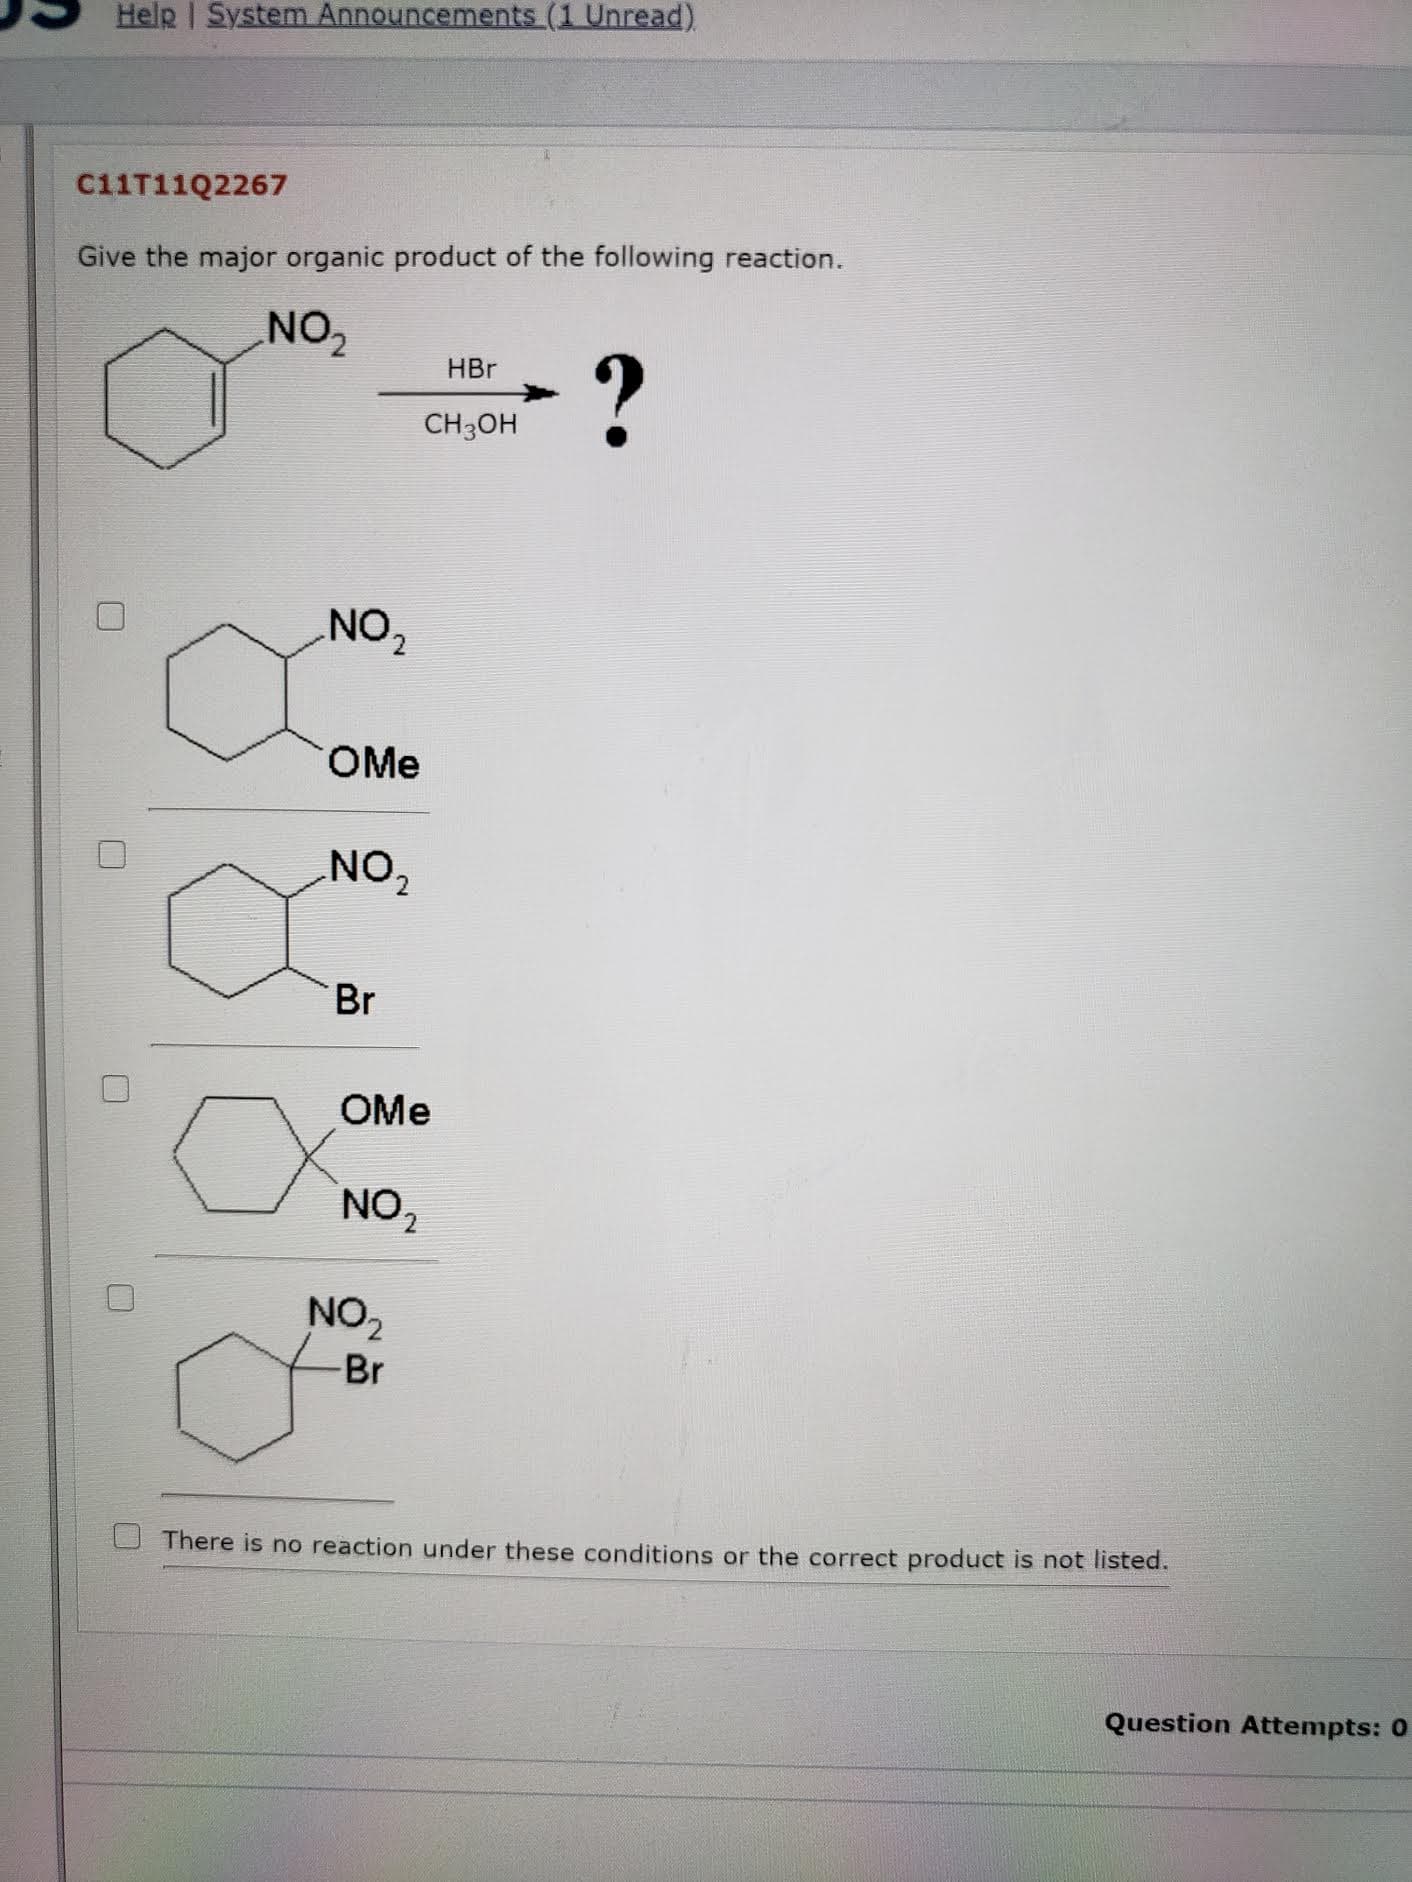 Give the major organic product of the following reaction.
NO2
HBr
CH3OH
NO,
OMe
NON
Br
OMe
NO2
NO,
Br
There is no reaction under these conditions or the correct product is not listed.
